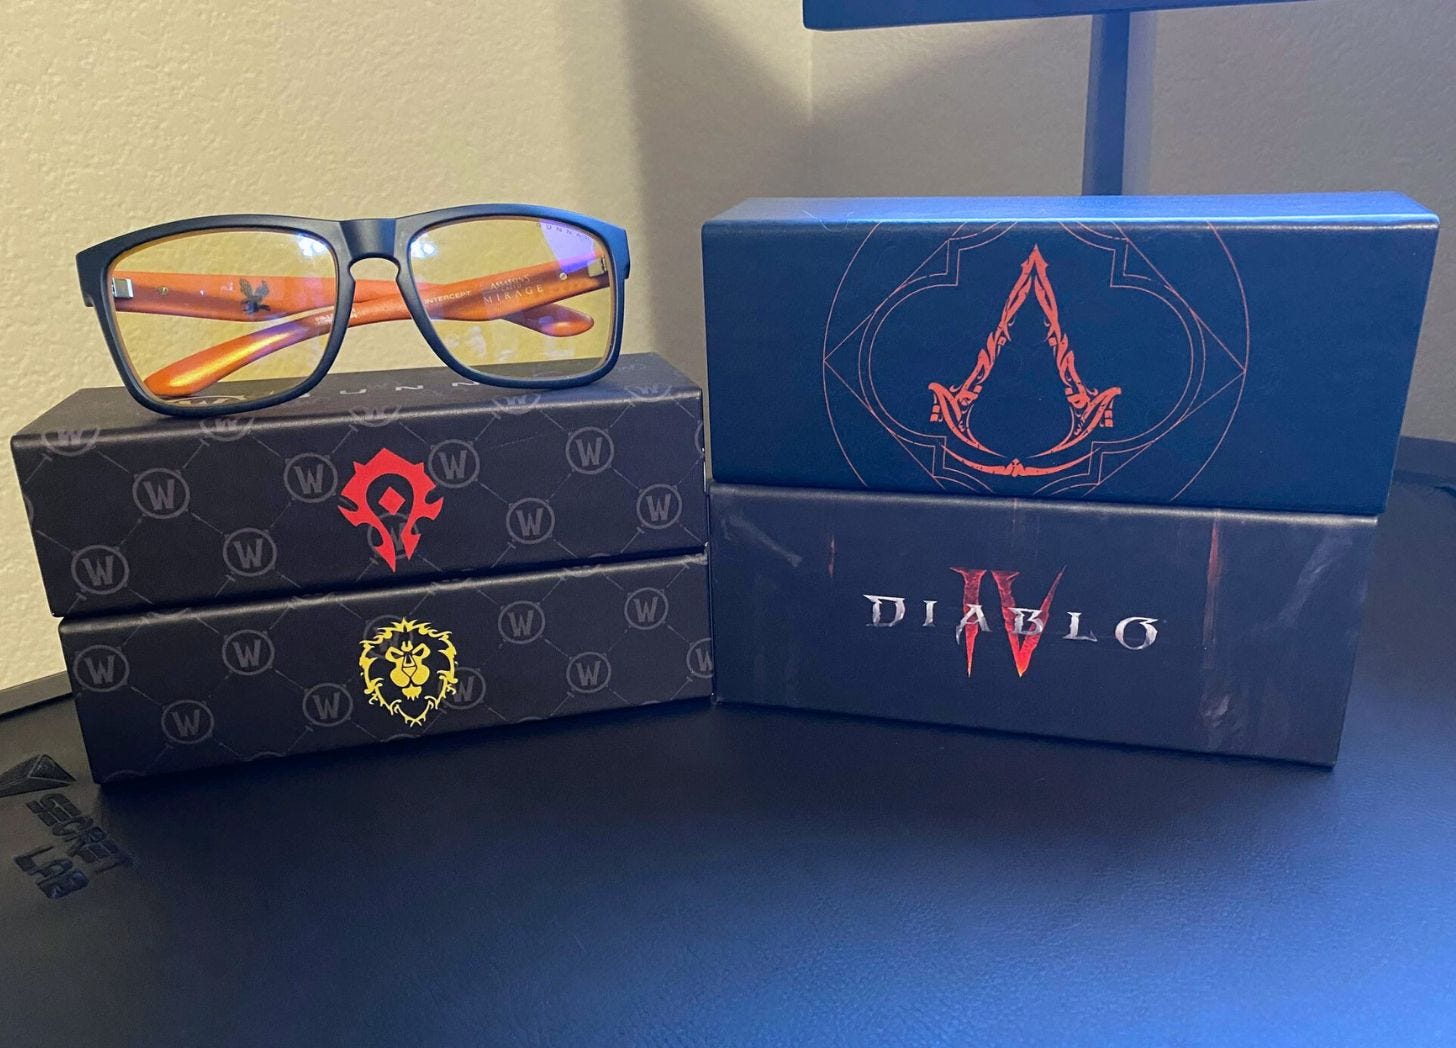 Collection of GUNNAR Optik Glasses in Assassin's Creed, Diablo IV, and WarCraft branding